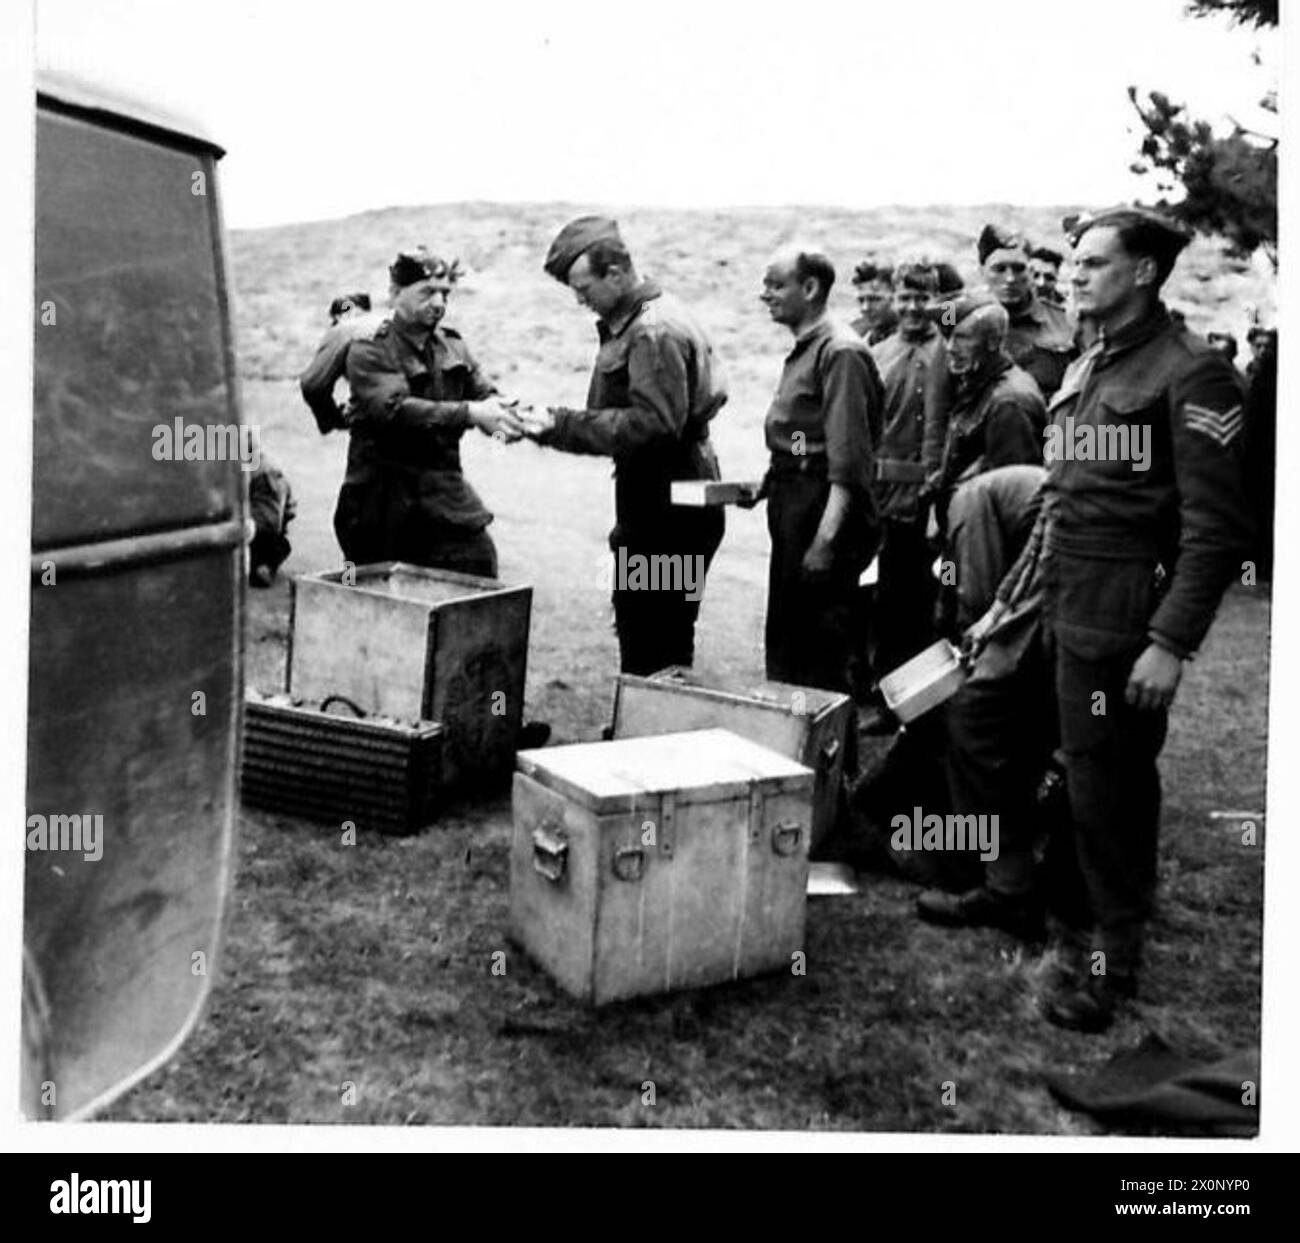 PIONEERS CLEARING LAND - Lining up for the mid-day meal. Photographic negative , British Army Stock Photo